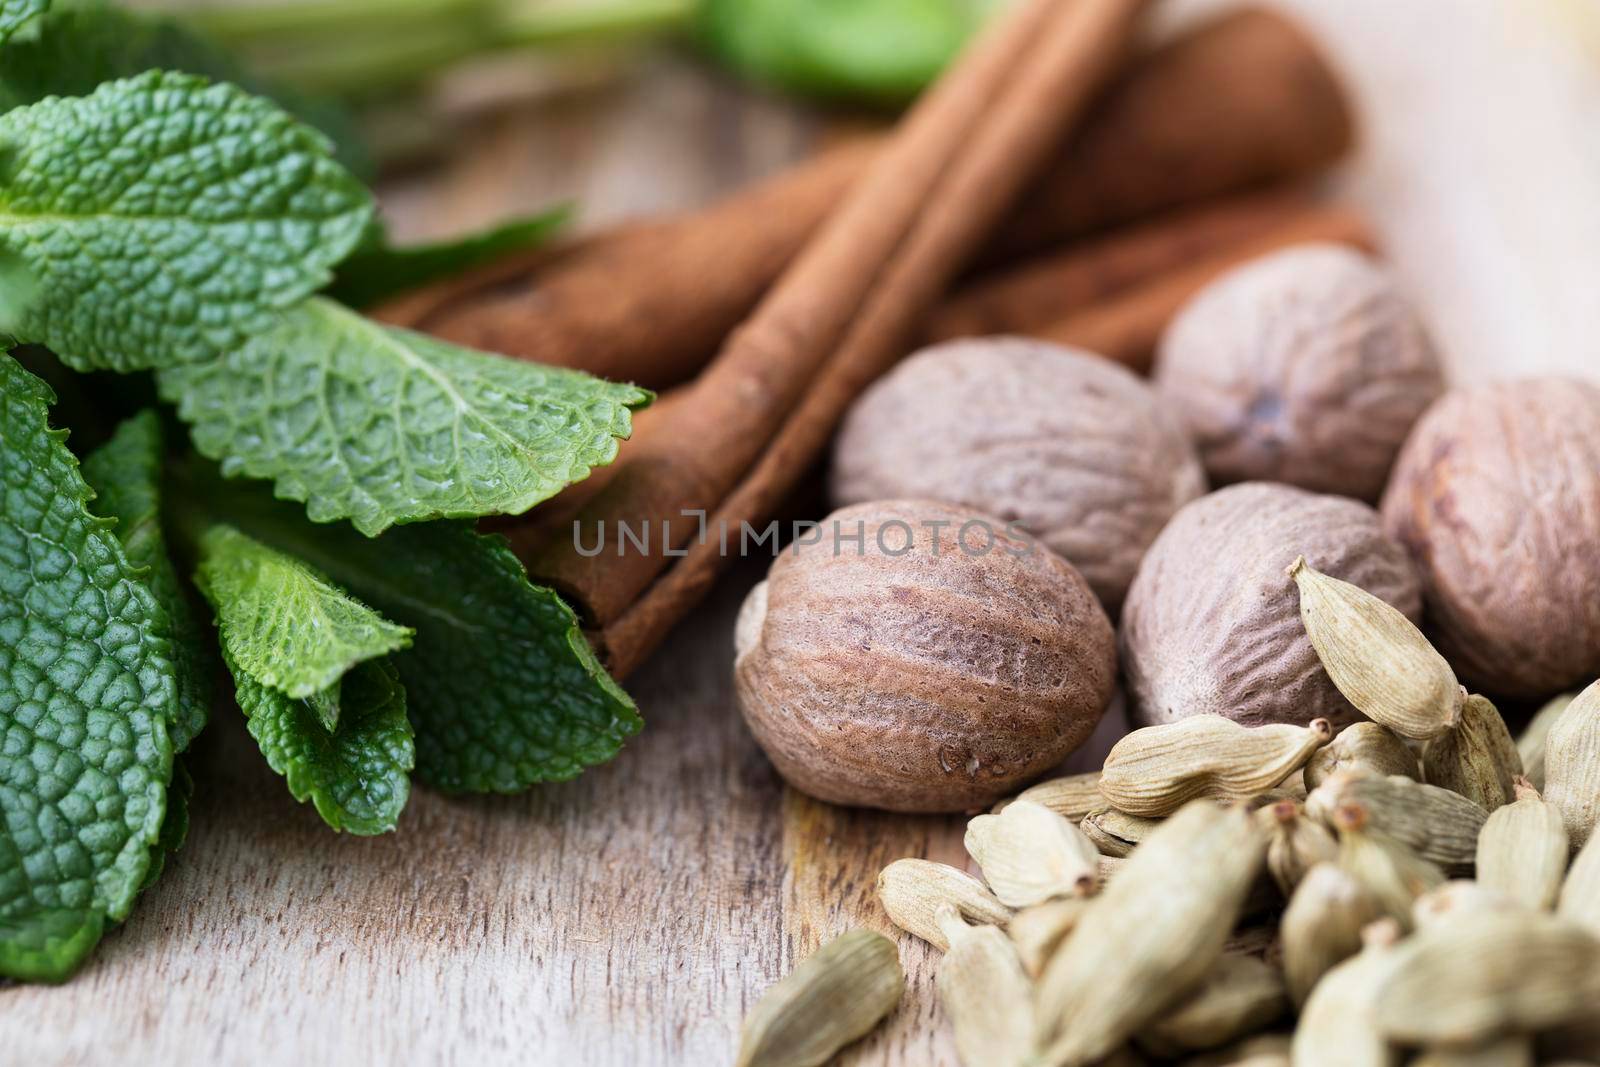 Cardamon, nutmeg, mint leaves and cinnamon sticks close-up on rustic wooden surface